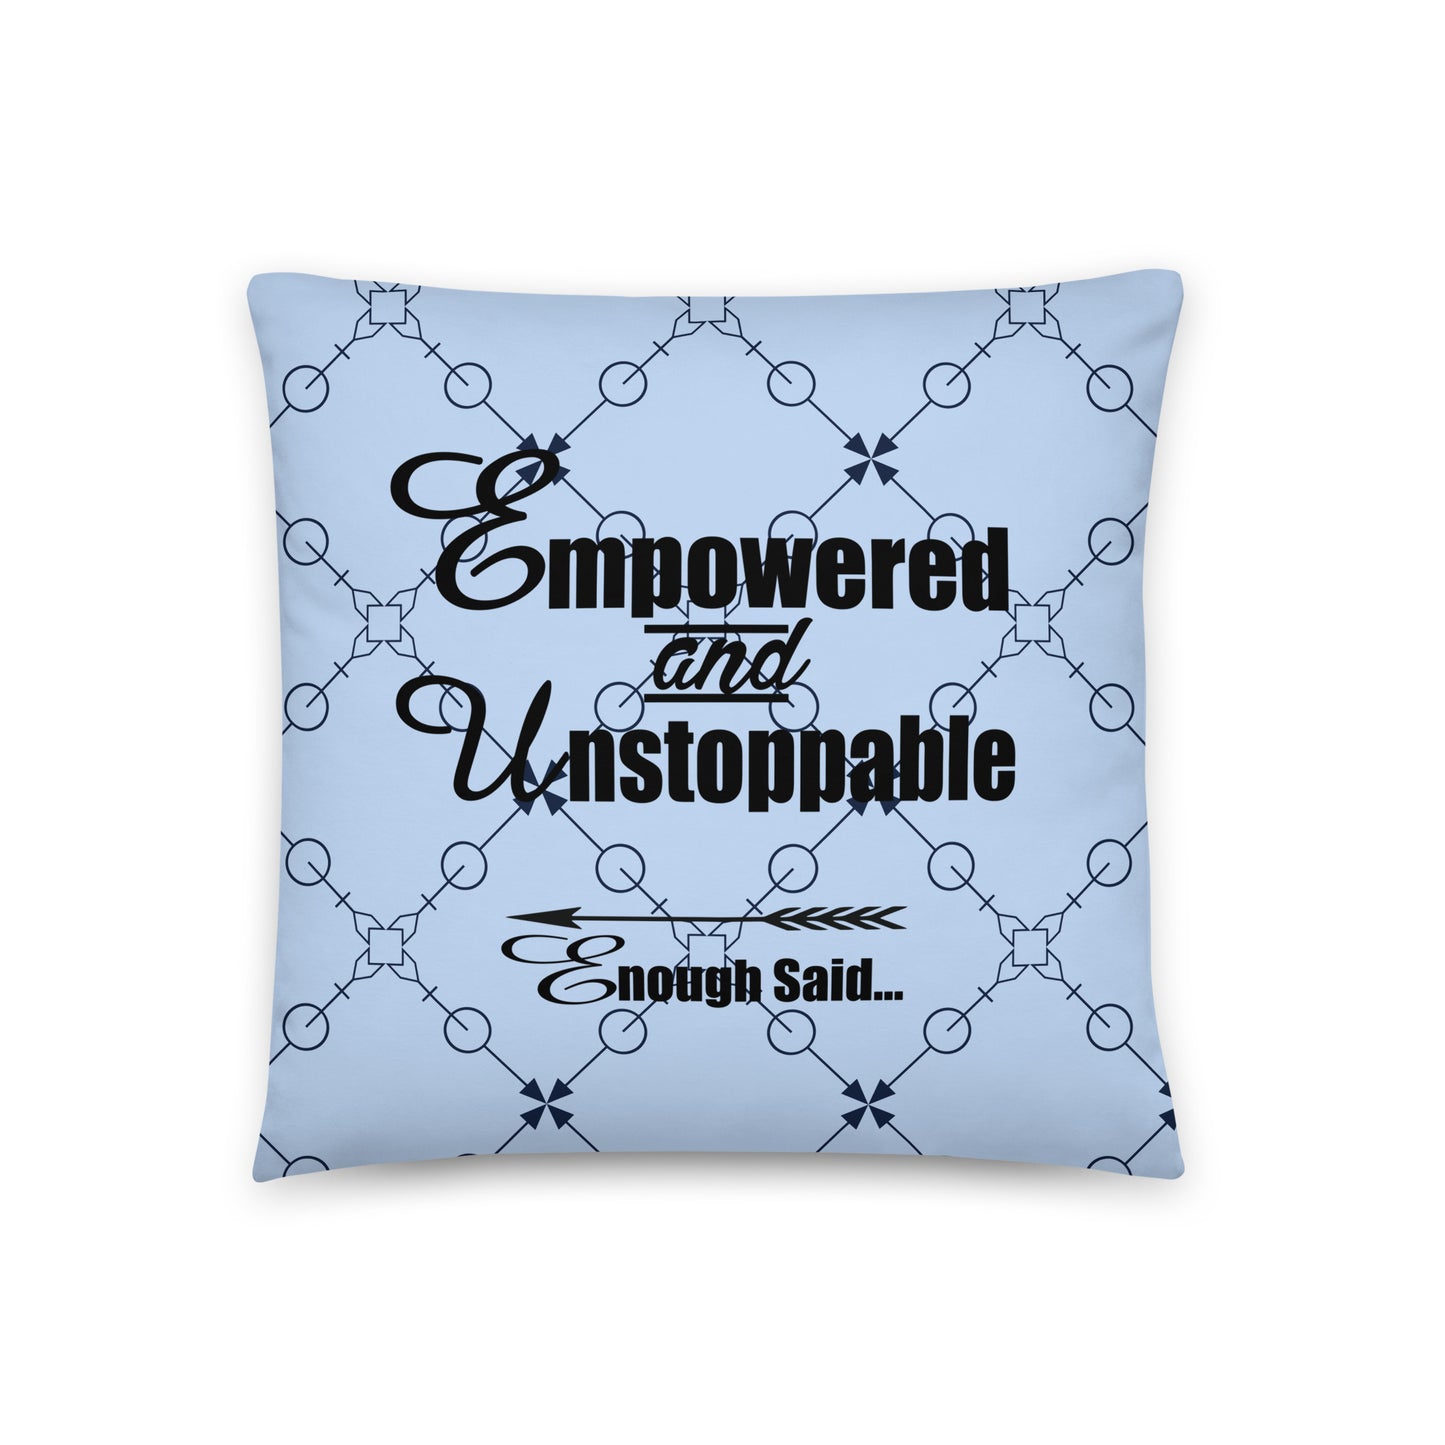 Empowered and Unstoppable Women's Empowerment  Pillow